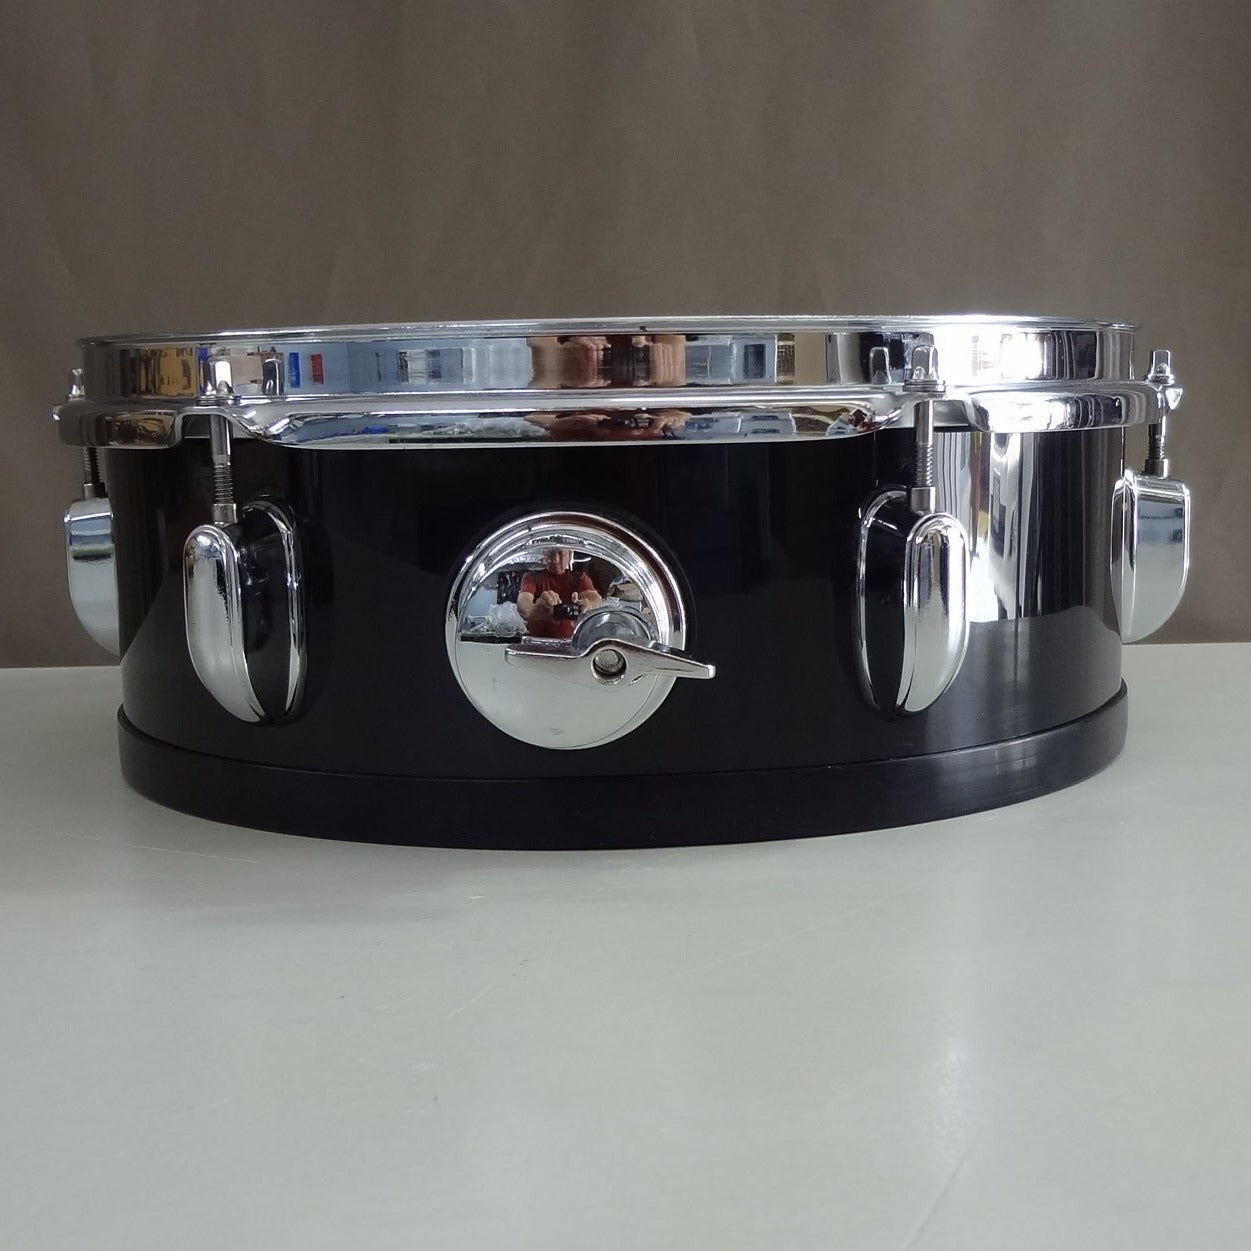 REFURBISHED 12'' ELECTRONIC SNARE DRUM.